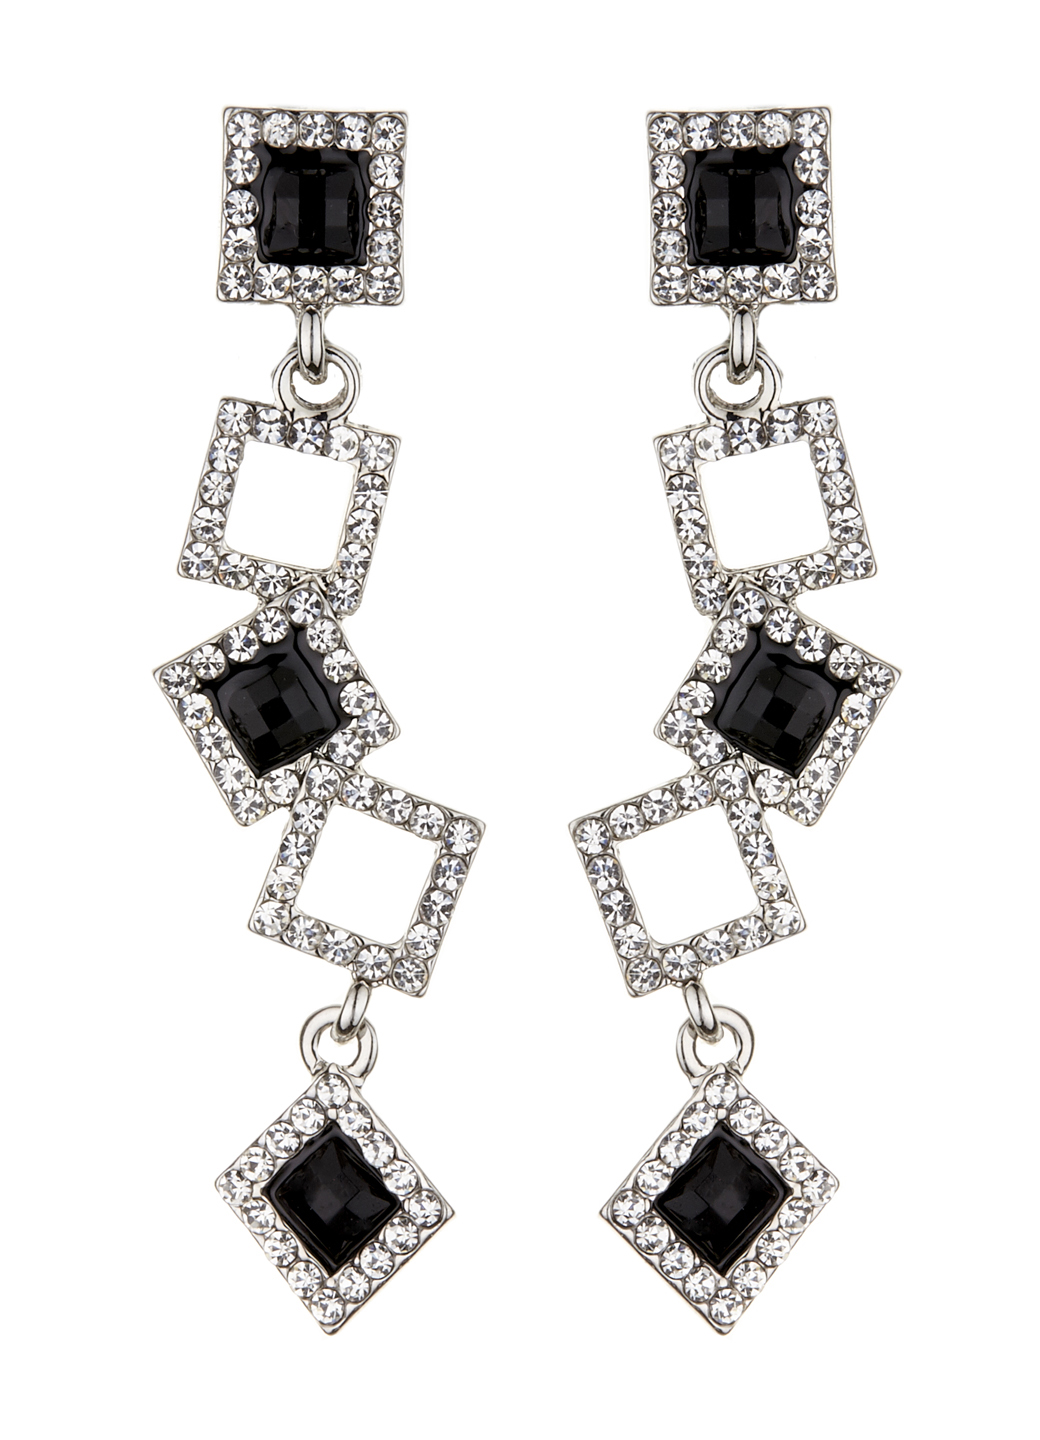 Clip On Earrings - Braith - silver earring with clear crystal squares and black stones